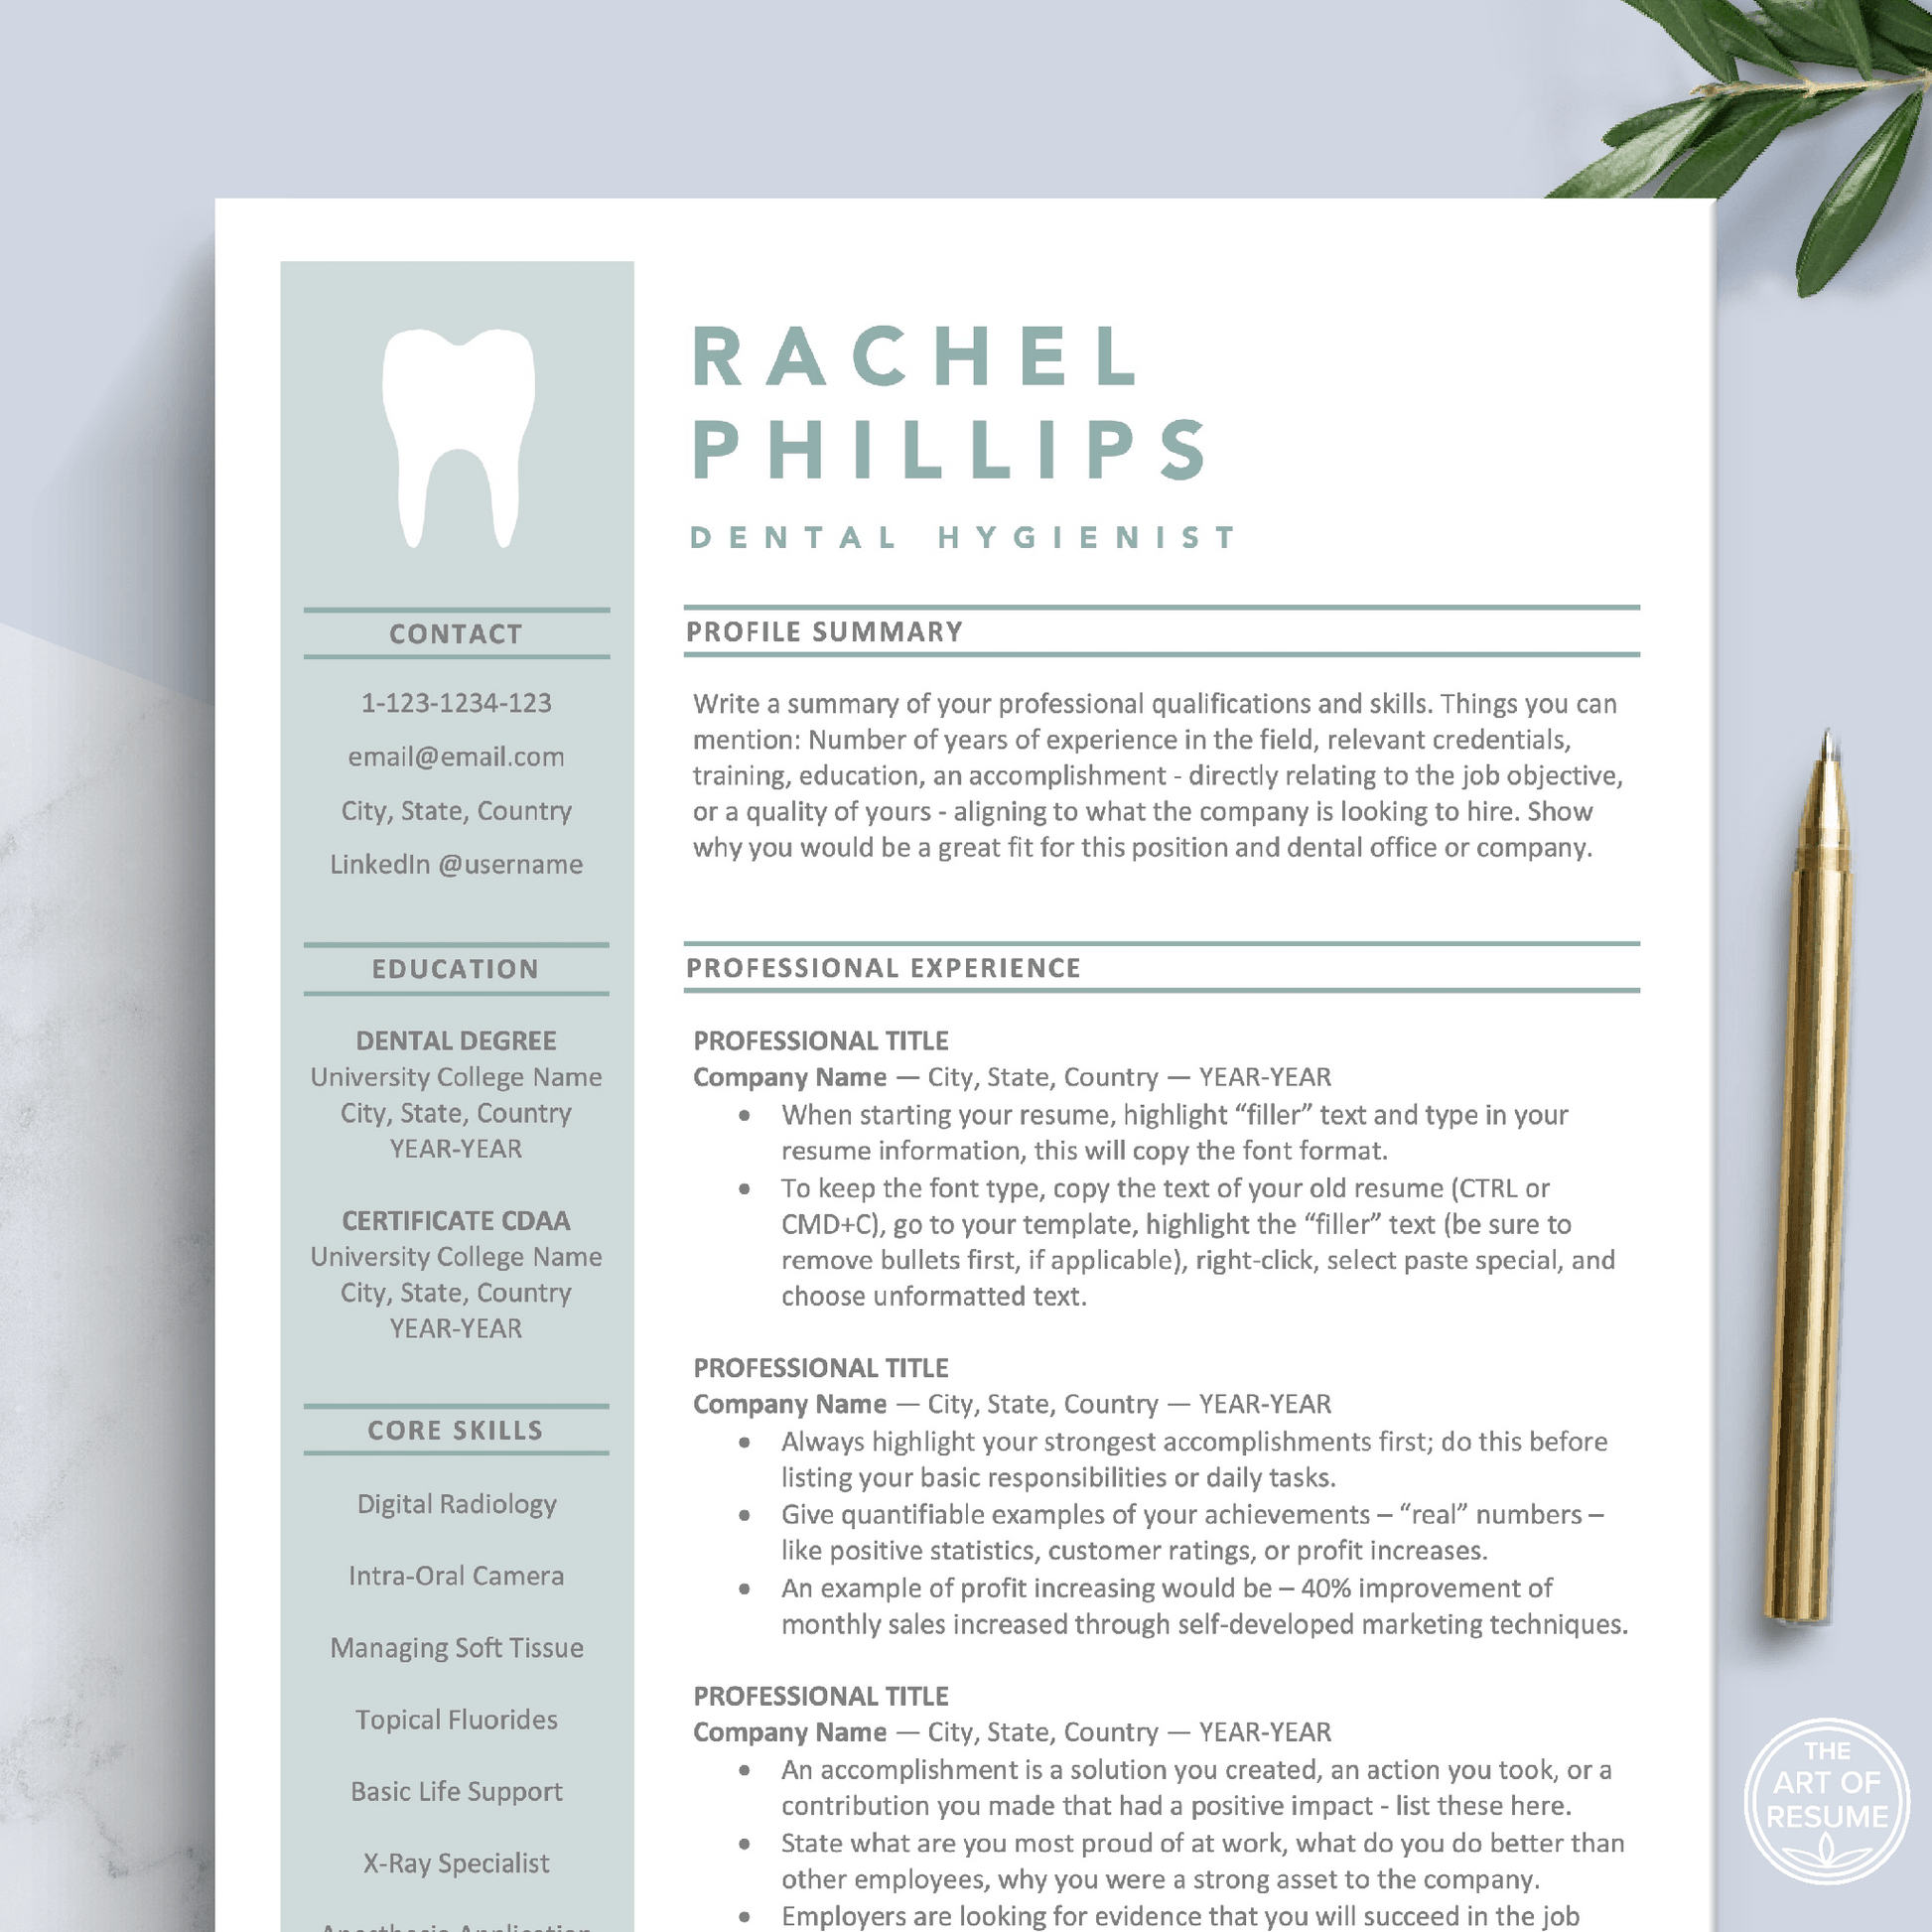 The Art of Resume Templates | Dentist, Hygienist, Dental Student, Assistant Resume CV Design Template Maker, Instant Download Bundle for Apple Pages and Microsoft Word, Mac and PC Resume CV Template | Curriculum Vitae for Apple Pages, Microsoft Word, Mac, PC